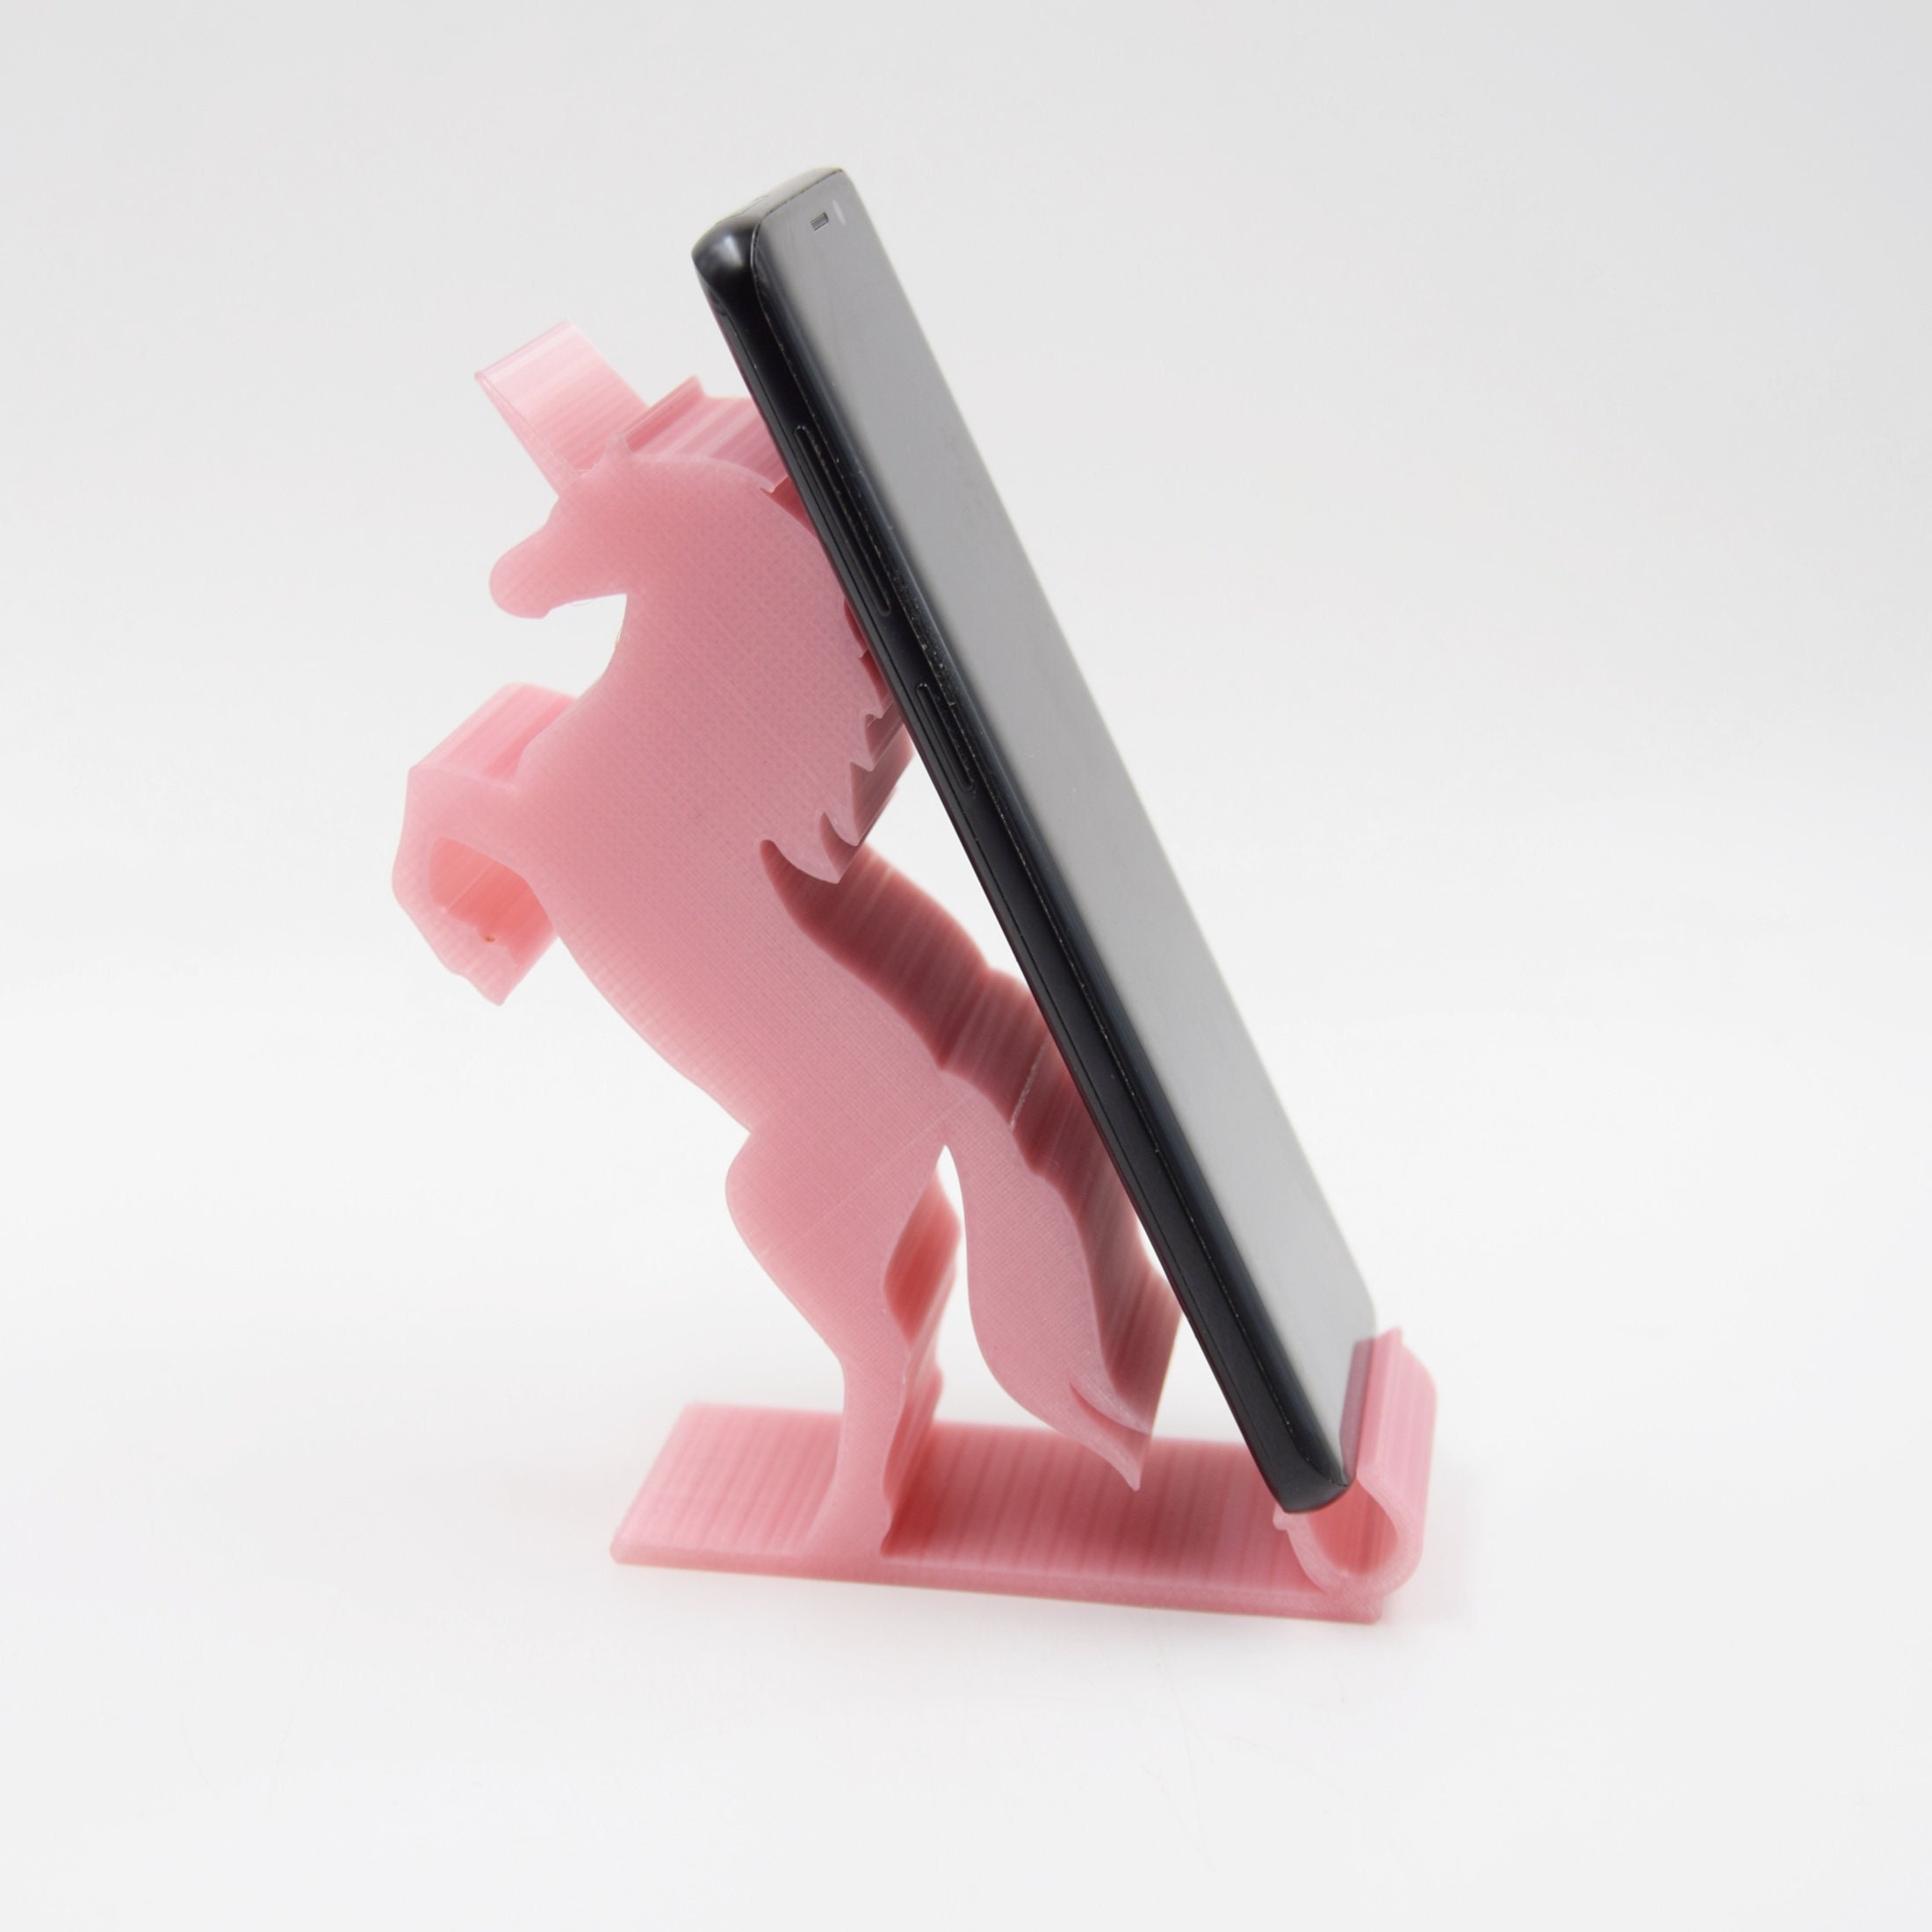 3d Printed Pink Unicorn Phone Stand Mobile Phoneiphone - Etsy